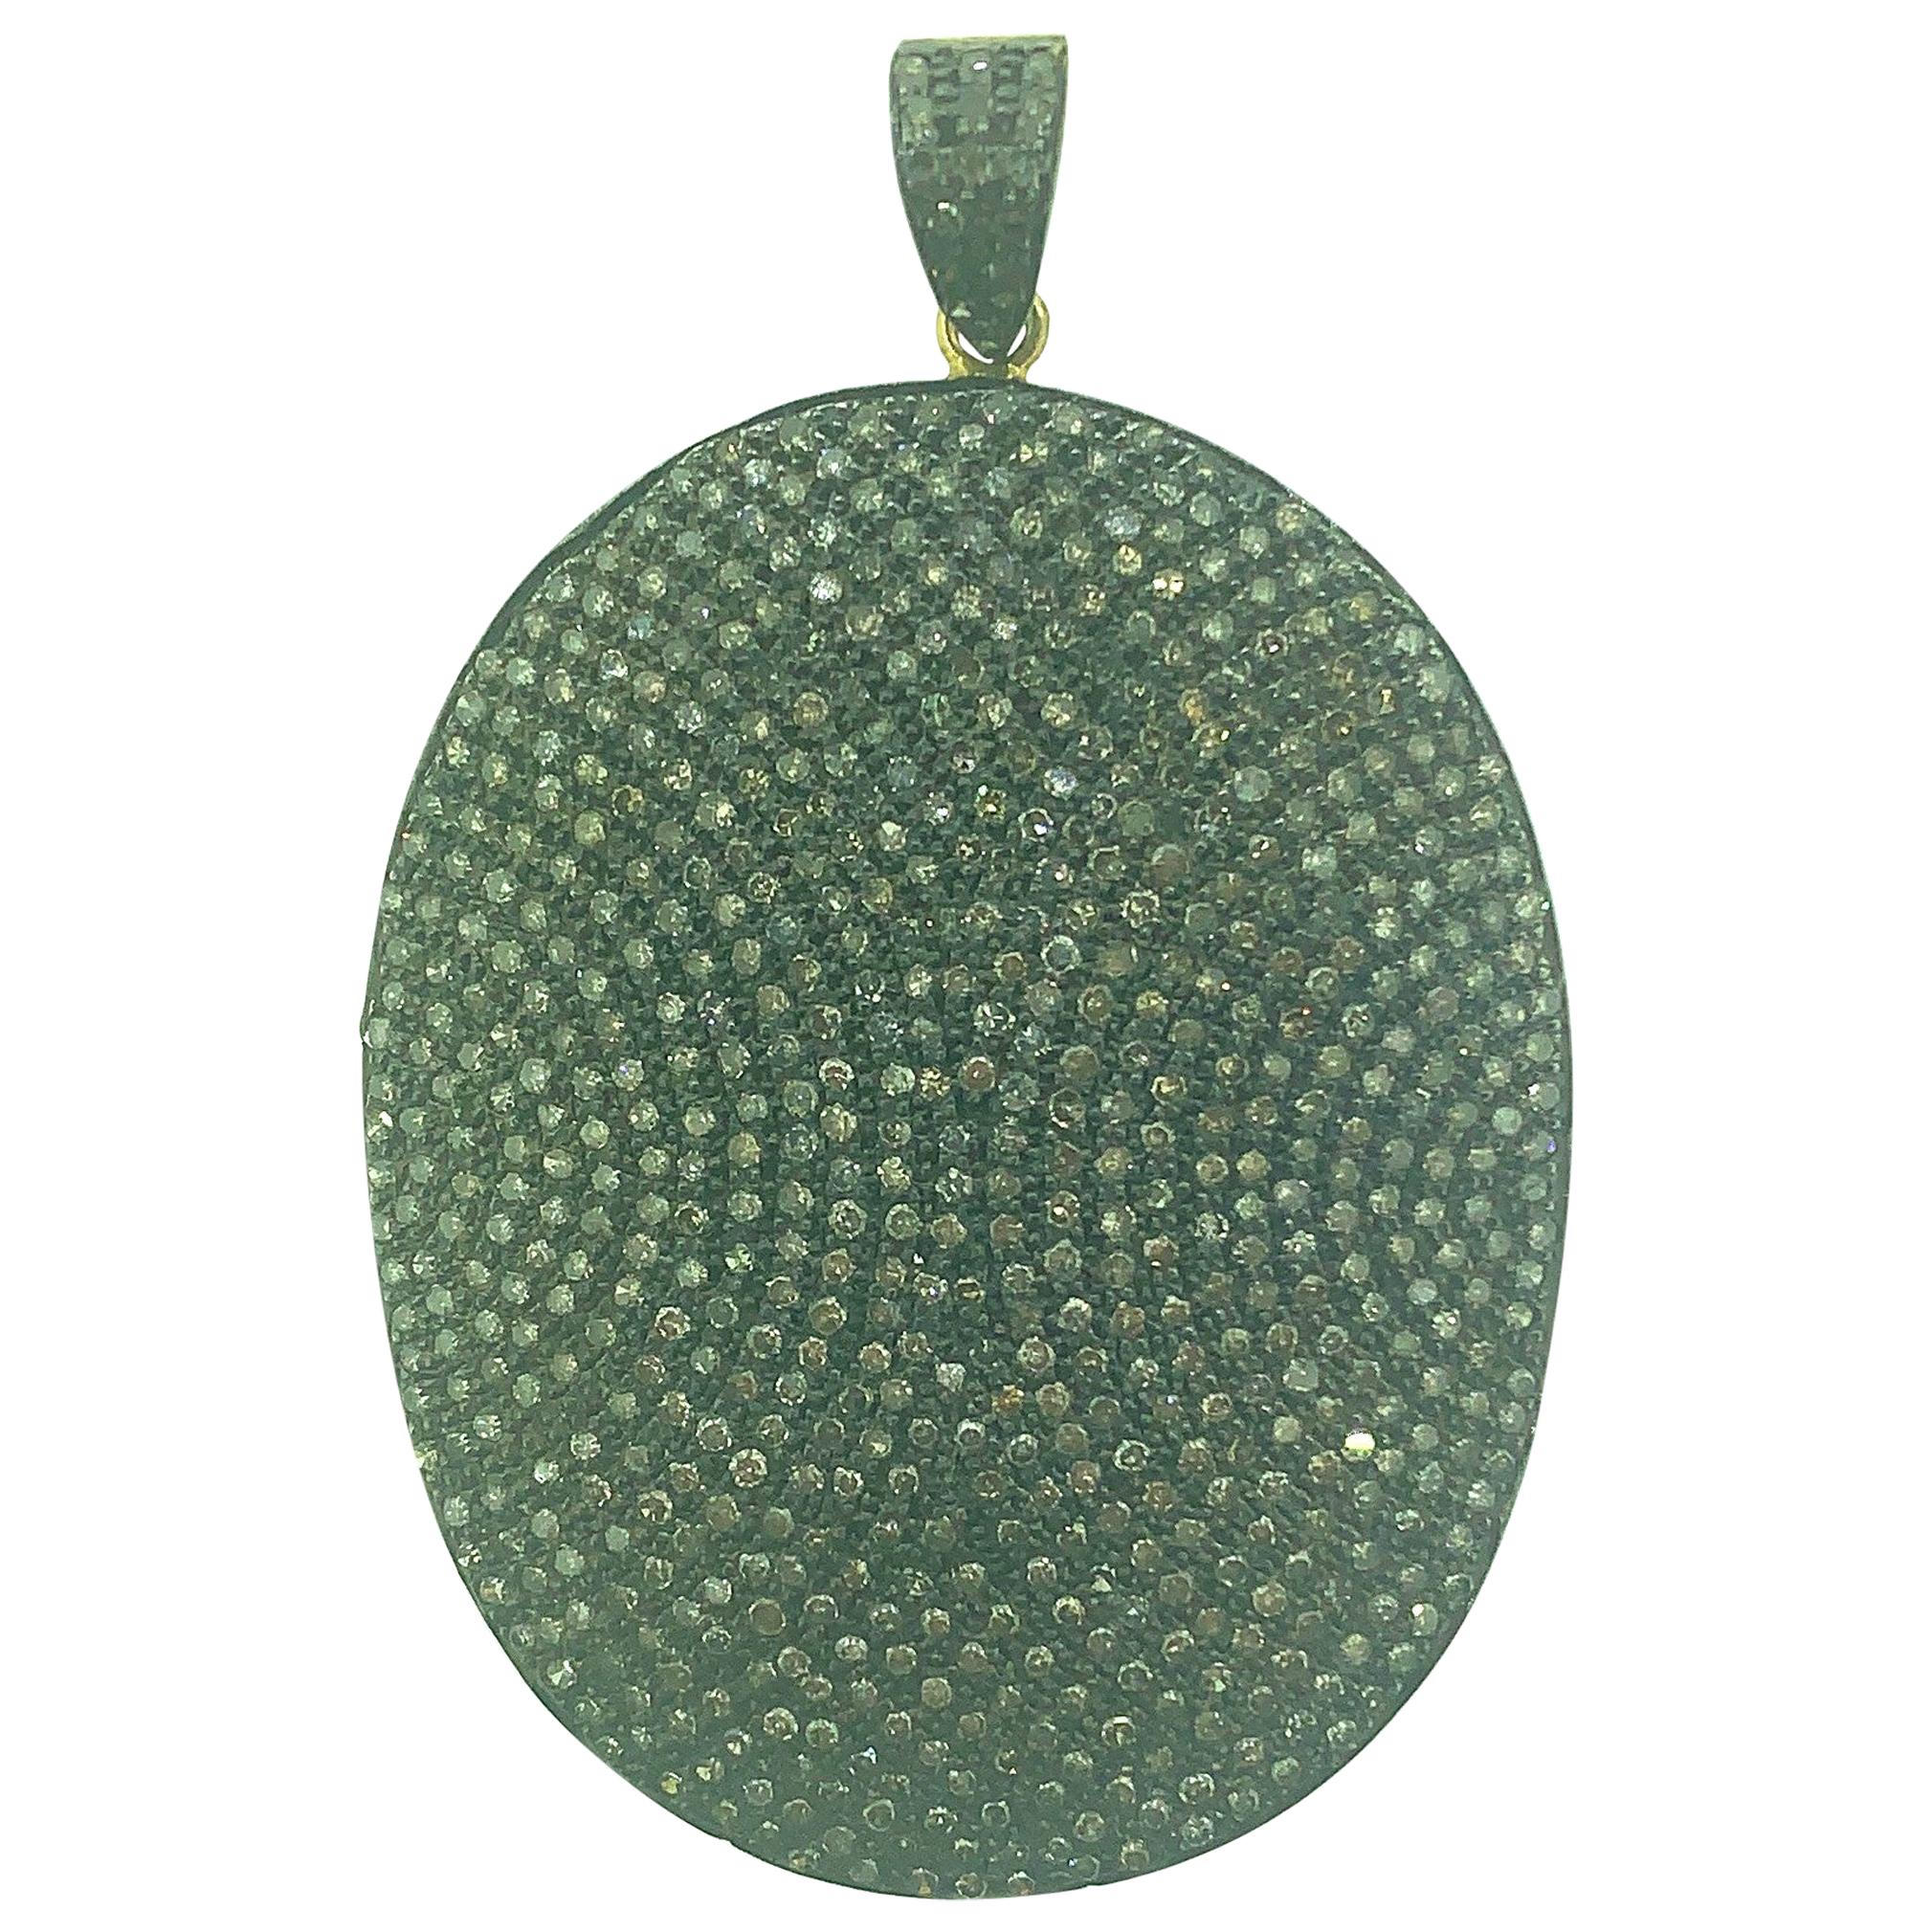 4.45 Carat Oval Pave Diamond Pendant in Oxidized Sterling Silver, 14 Karat Gold For Sale